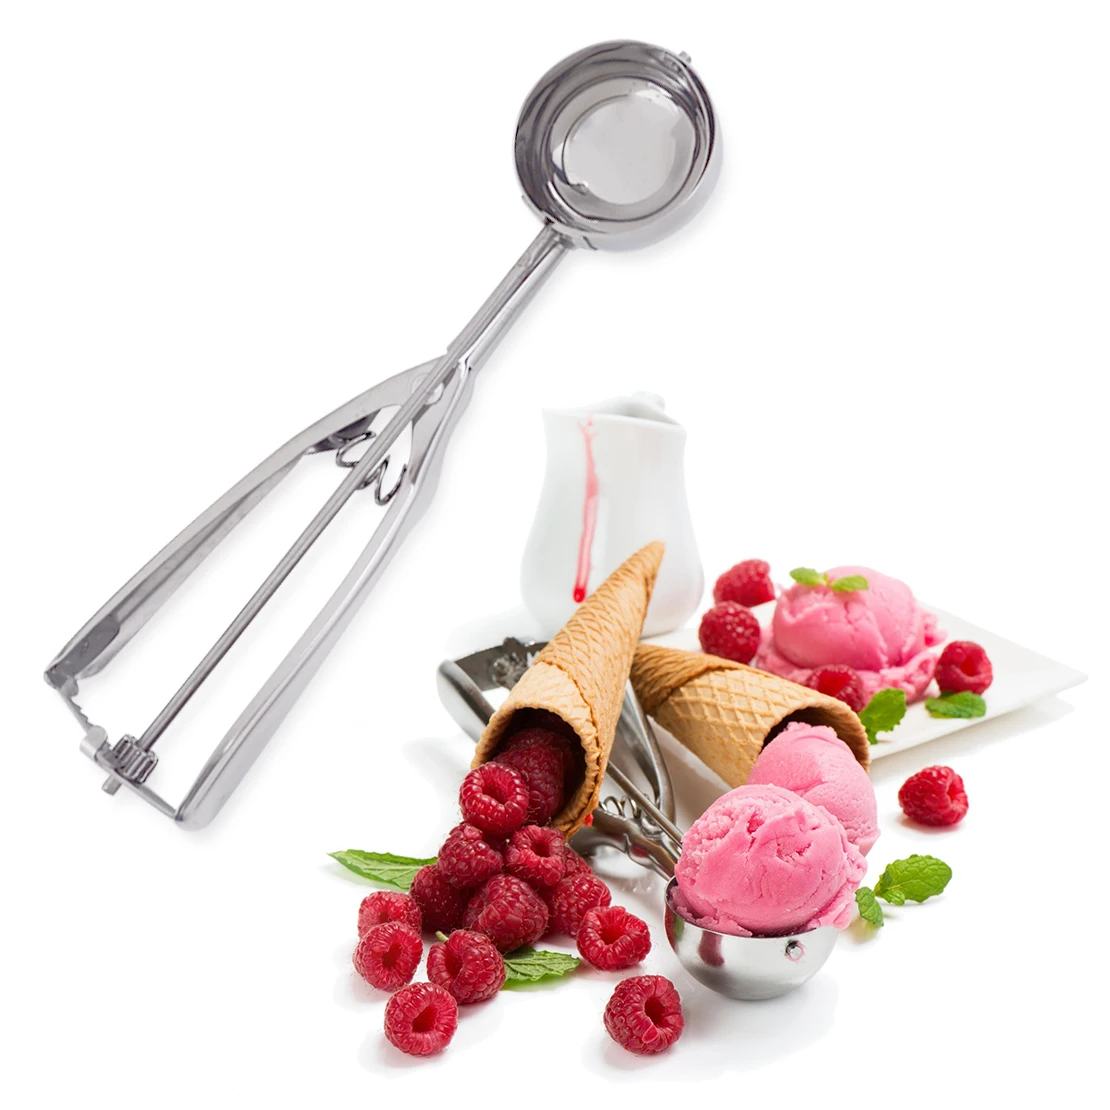 

Silver Stainless Steel Ice Cream Scoop Mash Potato Spoon Spring Handle Food Baller Fast Kitchen Tool